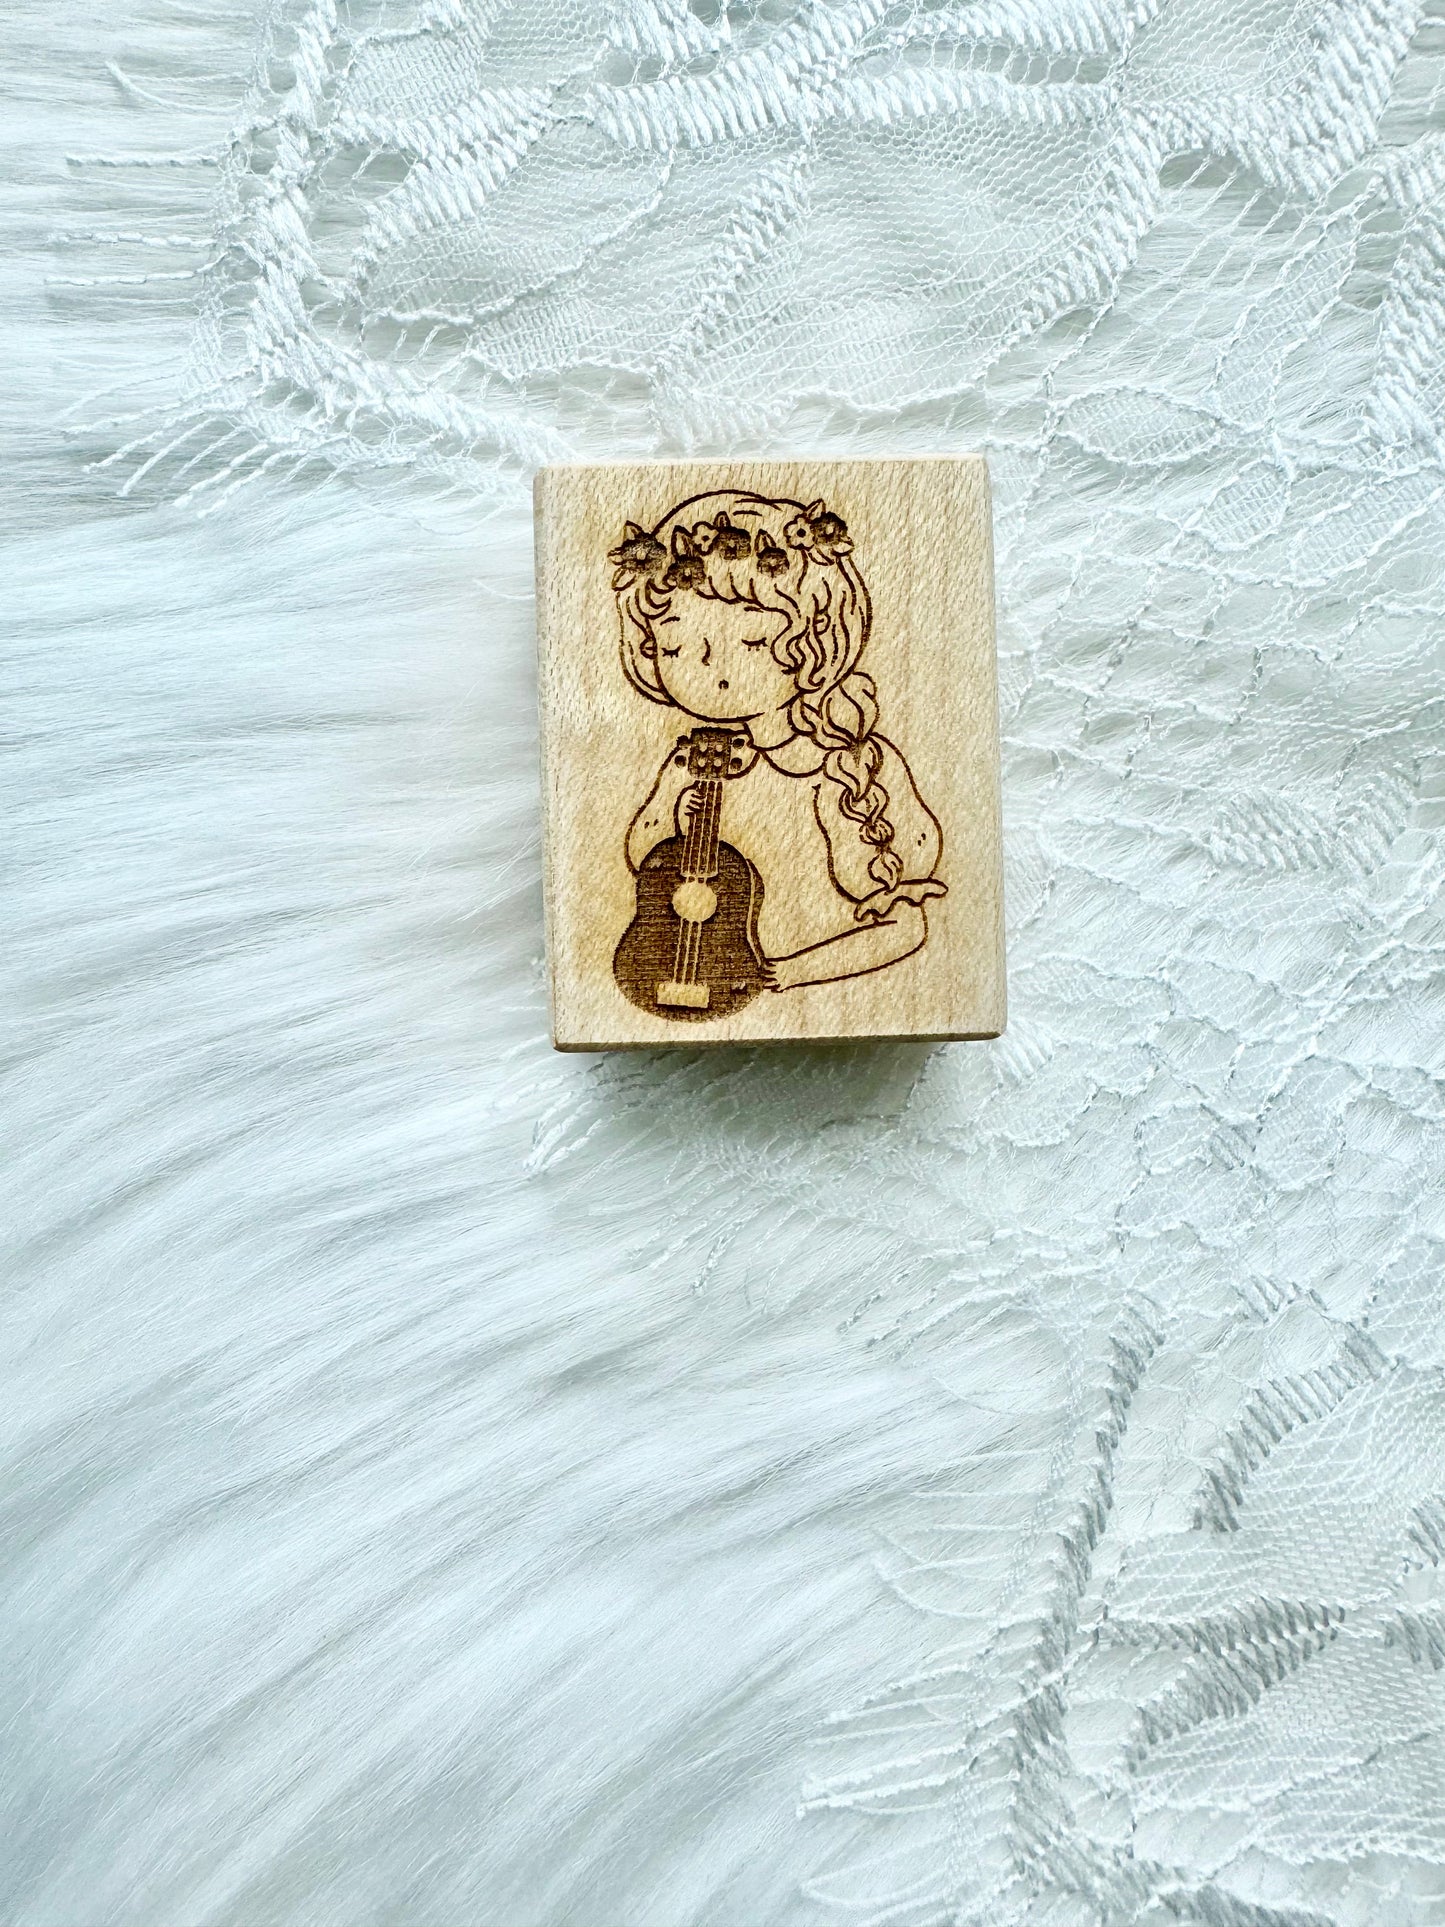 NEW! Sho Littlehappiness | Rubber Stamps